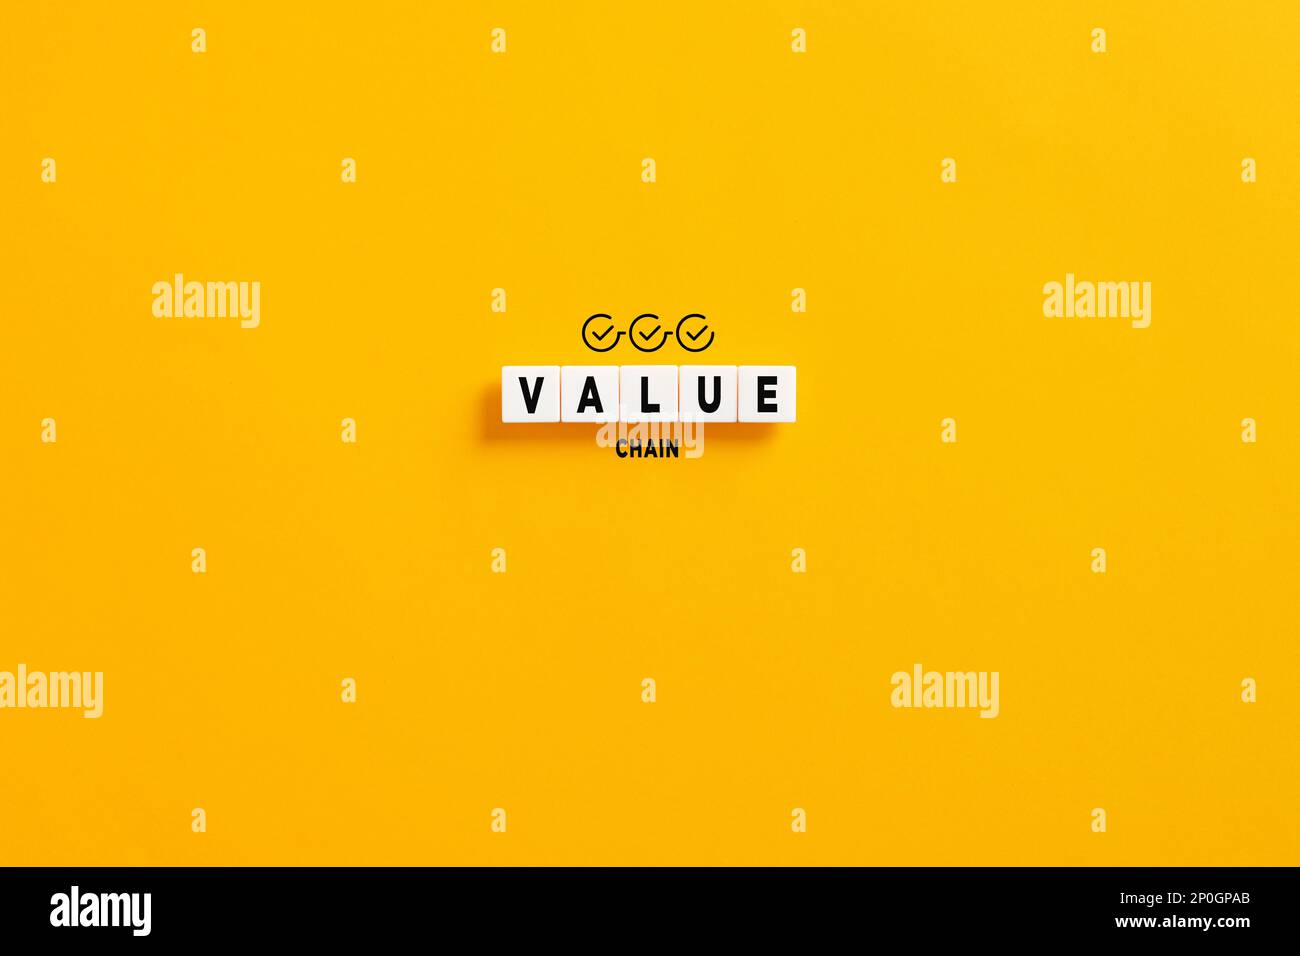 White letter blocks on yellow background with the word value chain. Business manufacturing process and industry development analysis. Stock Photo